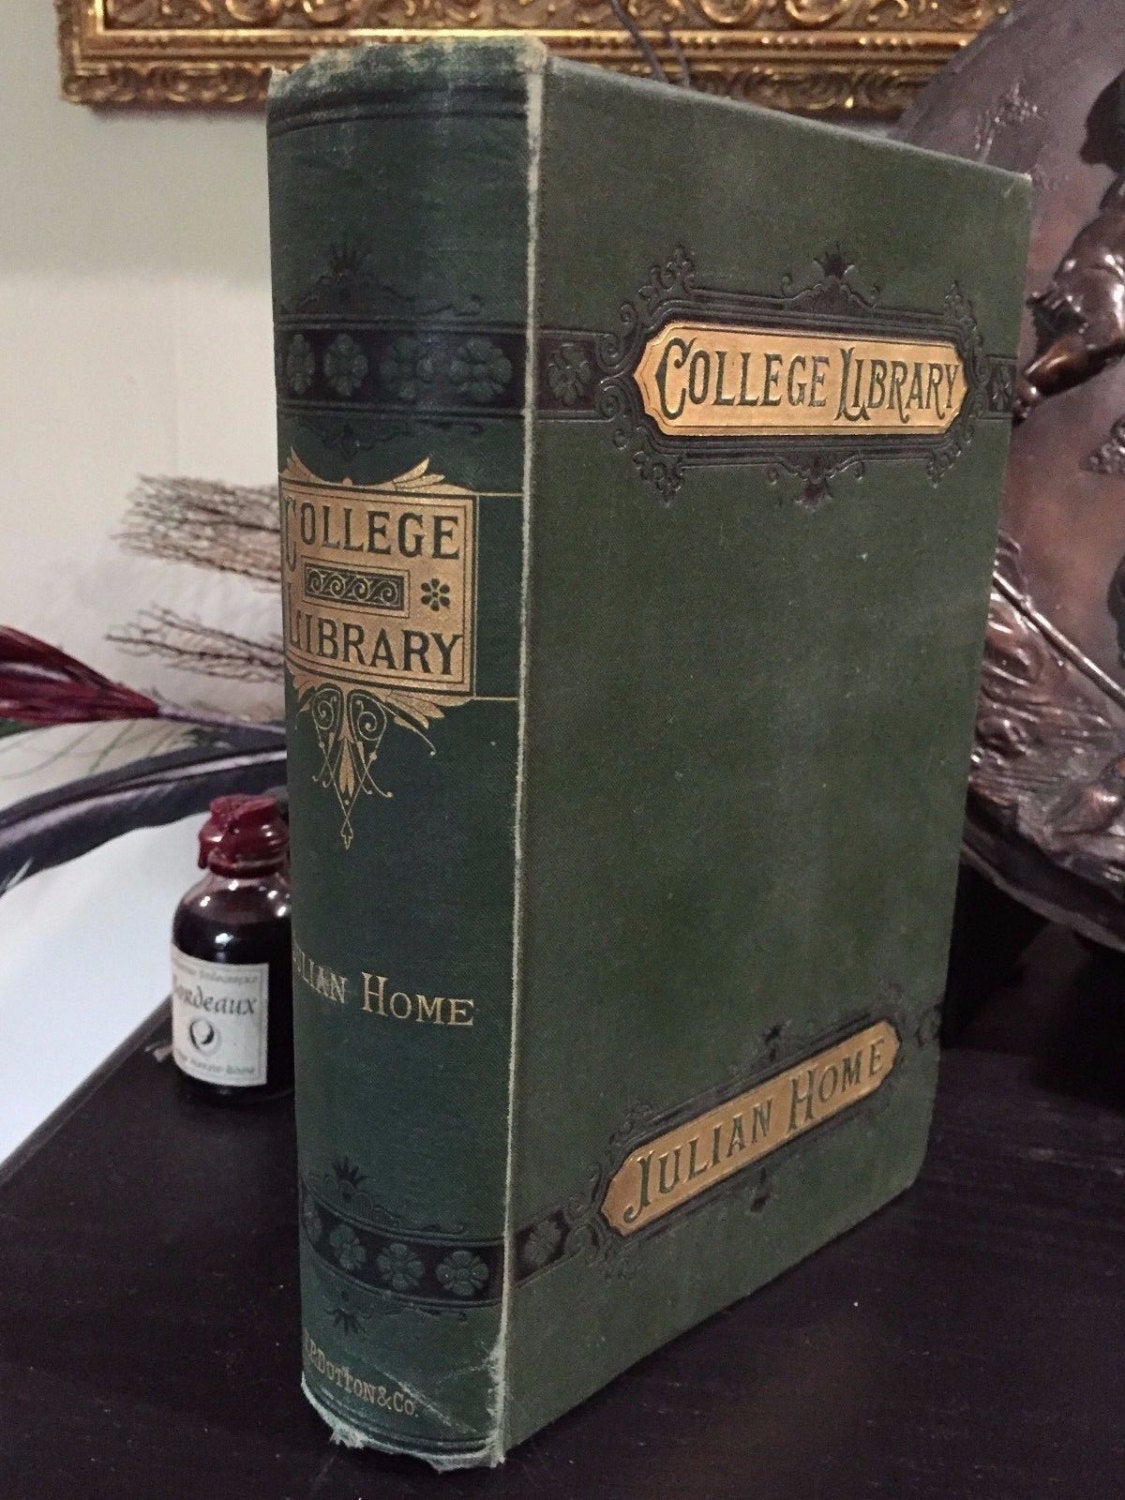 Julian Home, a Tale of College Life, Frederic W. Farrar, College Library, 1878